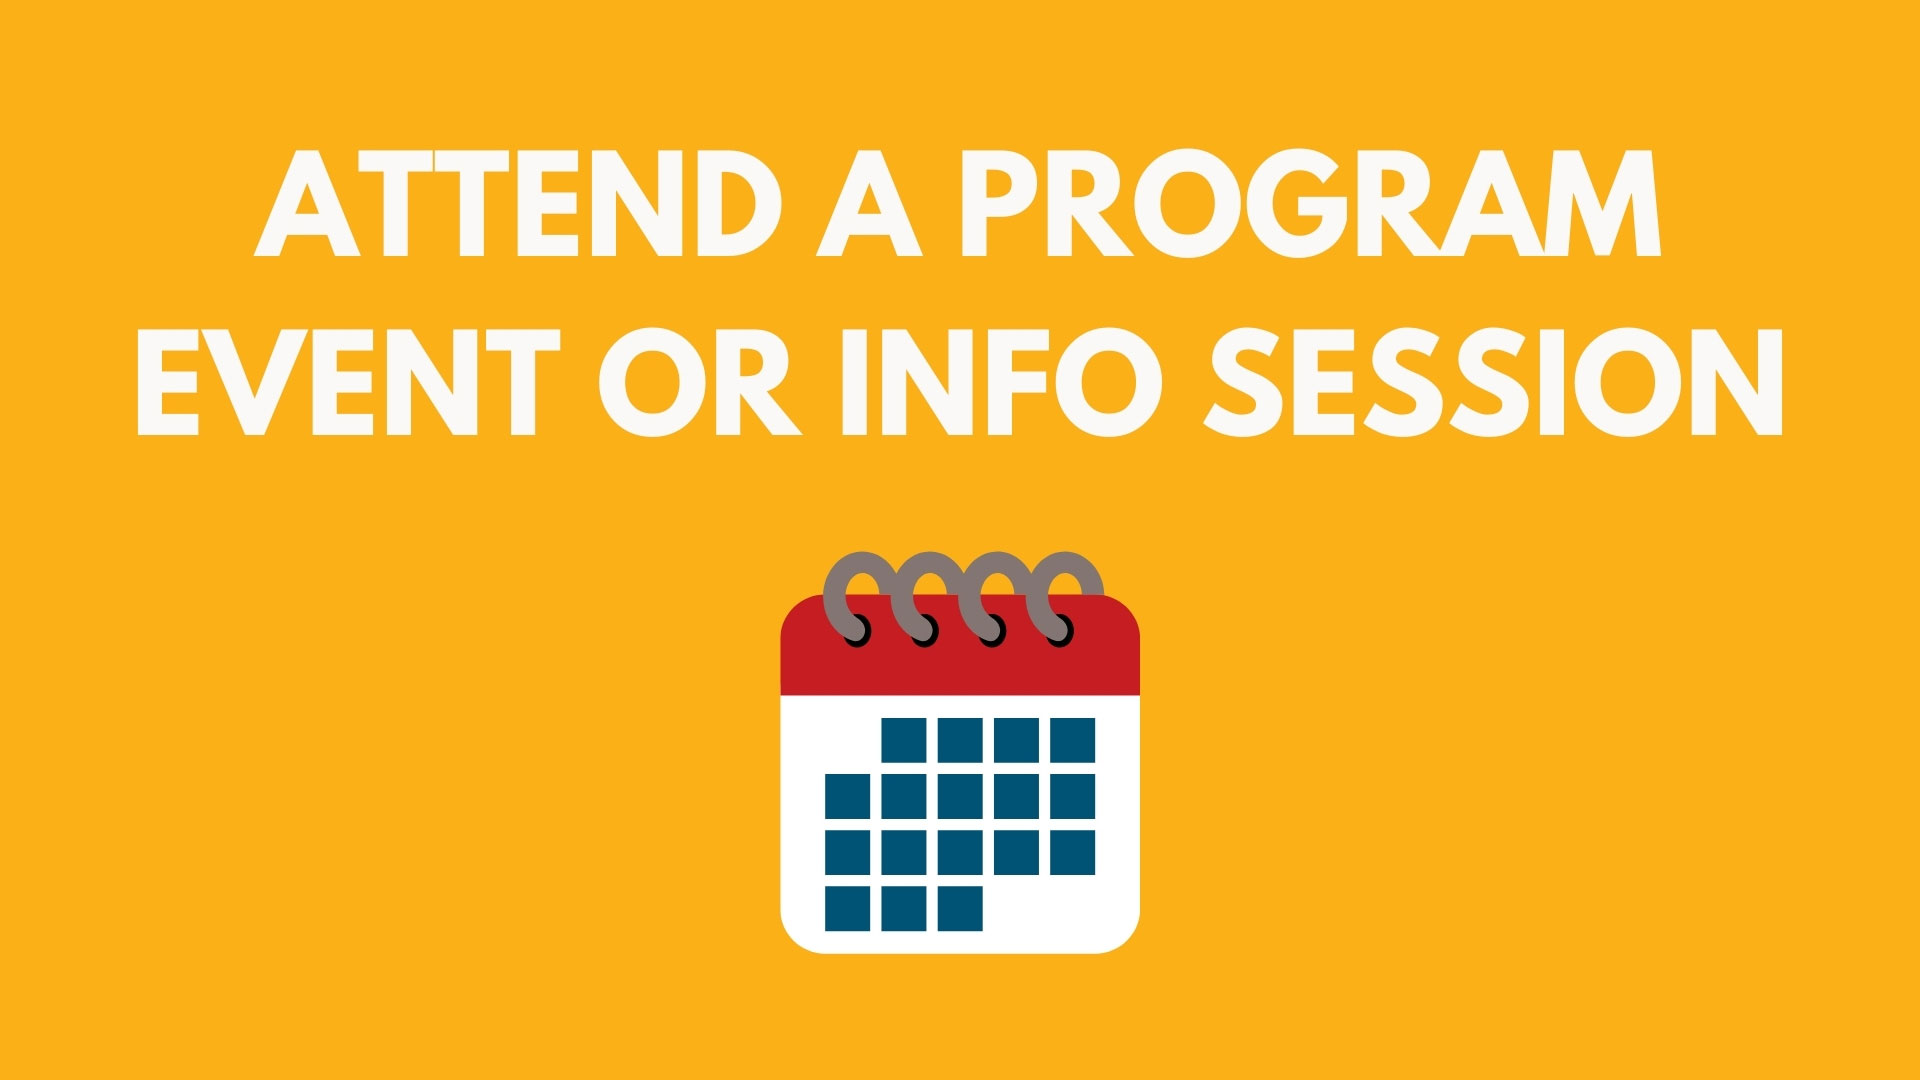 Attend a program event or info session